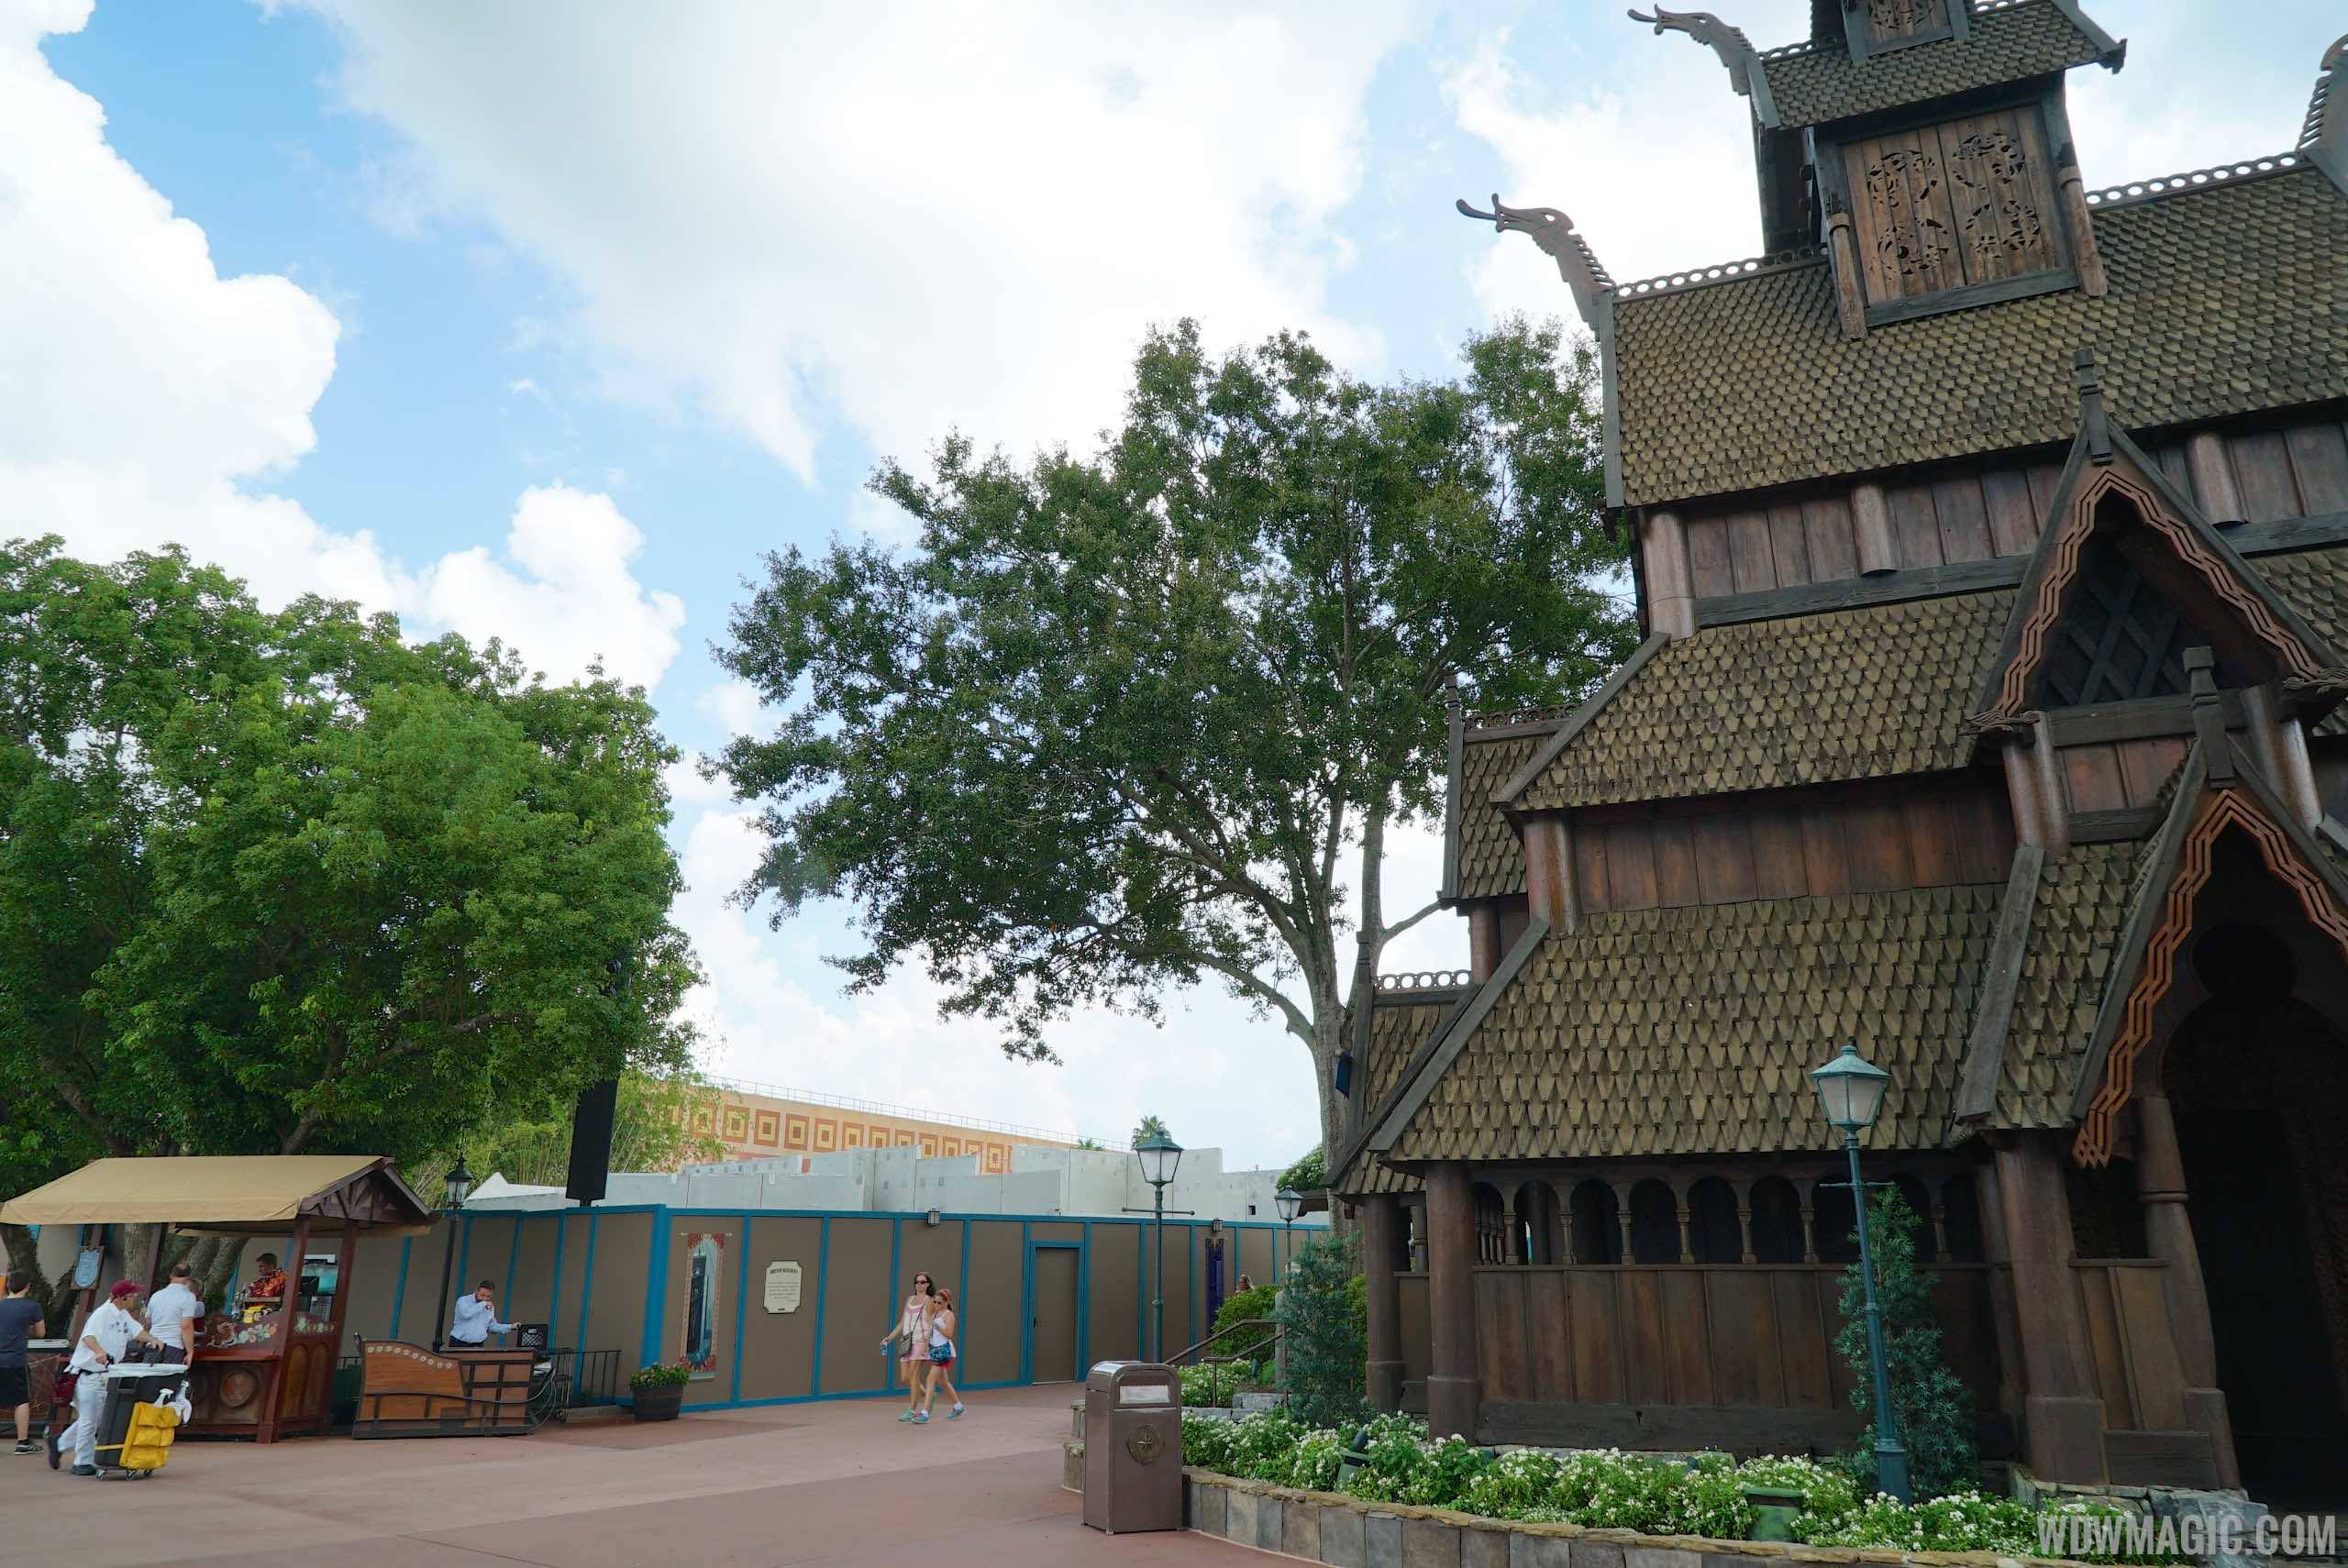 PHOTOS - Royal Sommerhus construction at Epcot's Norway Pavilion